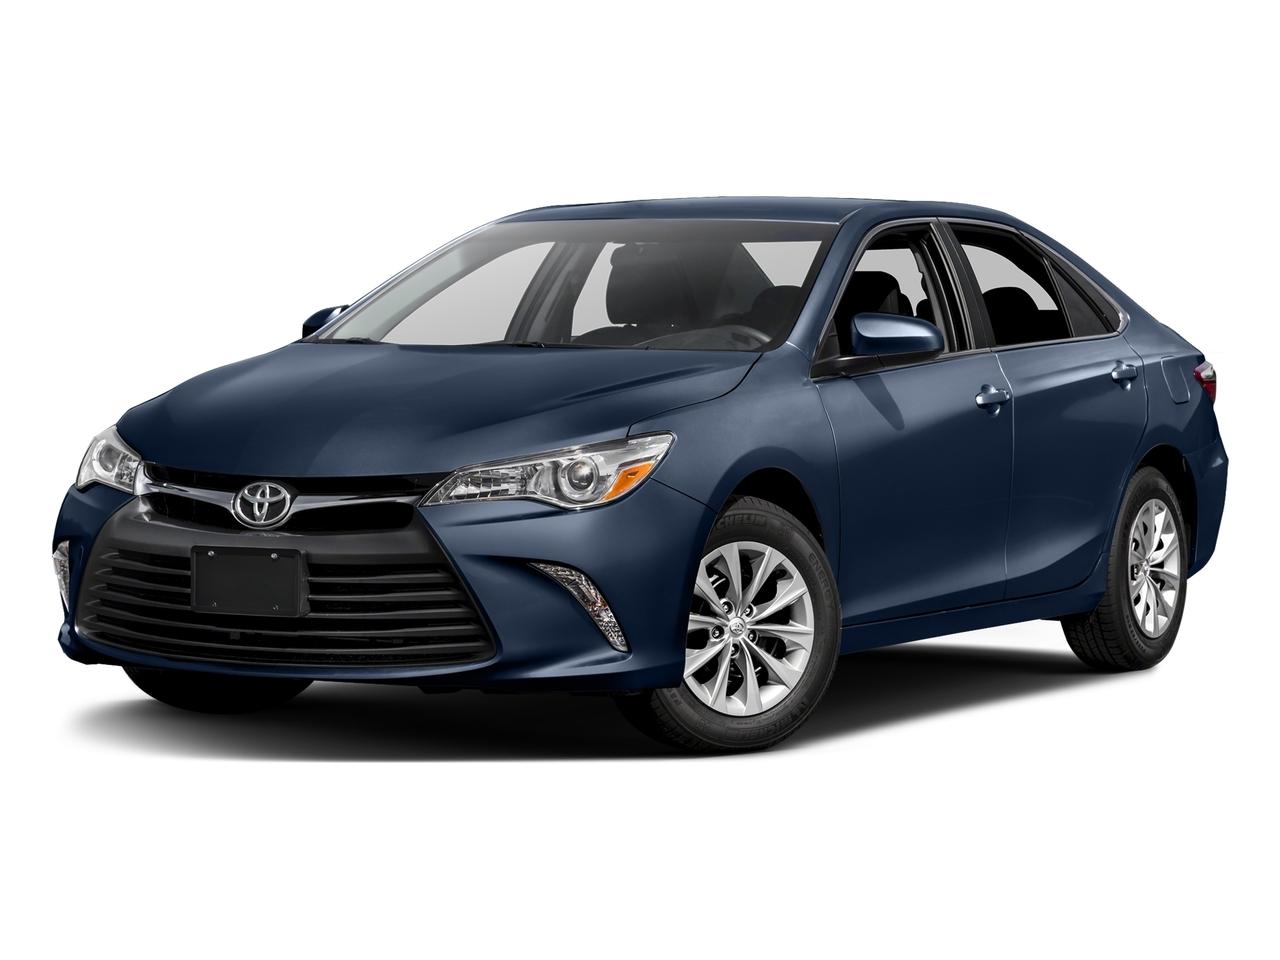 2016 Toyota Camry Vehicle Photo in Towson, MD 21204